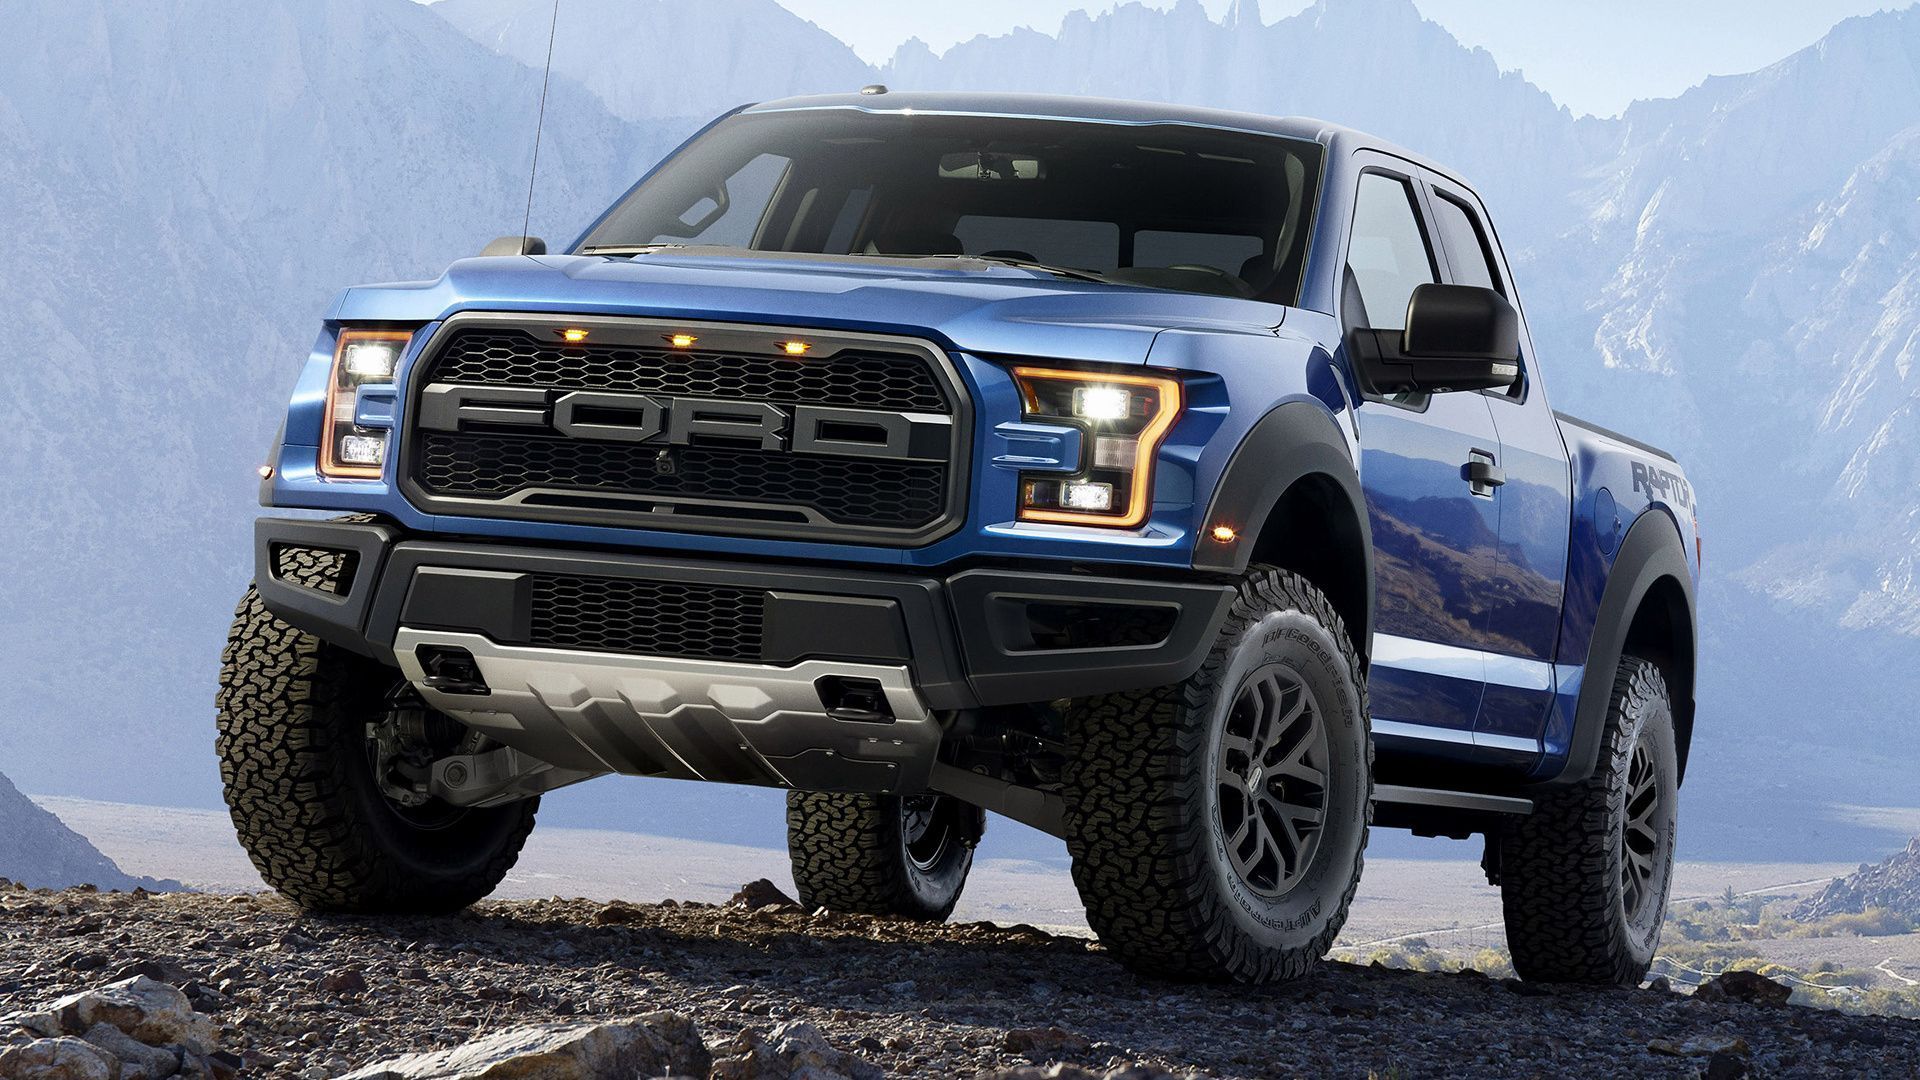 Ford F-150 Raptor SuperCab (2017) Wallpapers and HD Images